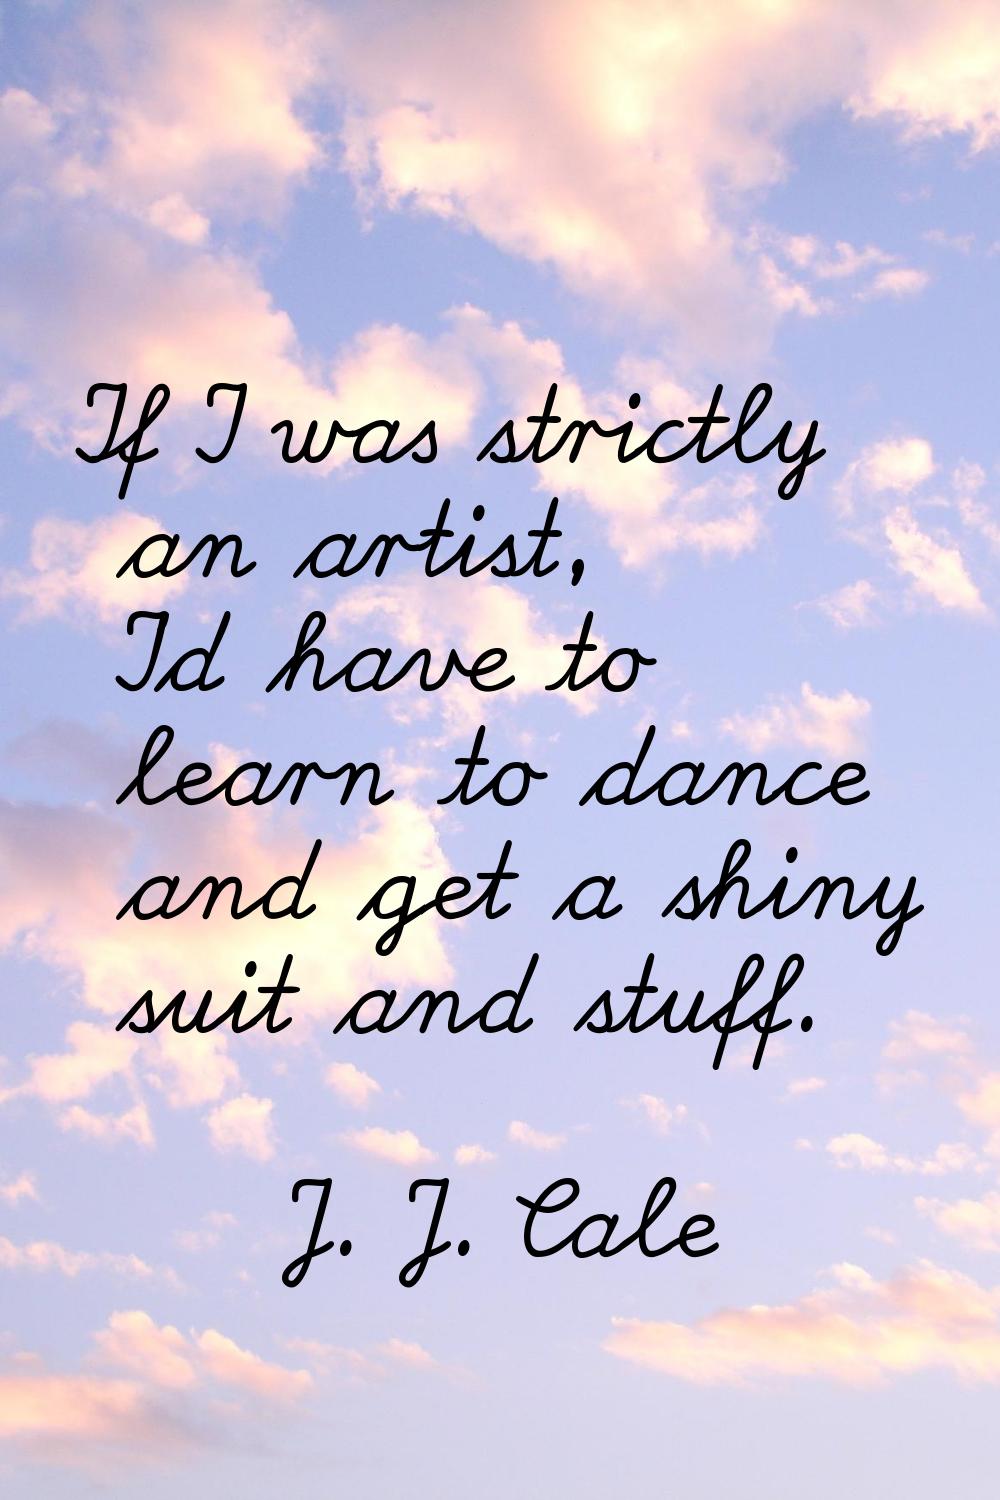 If I was strictly an artist, I'd have to learn to dance and get a shiny suit and stuff.